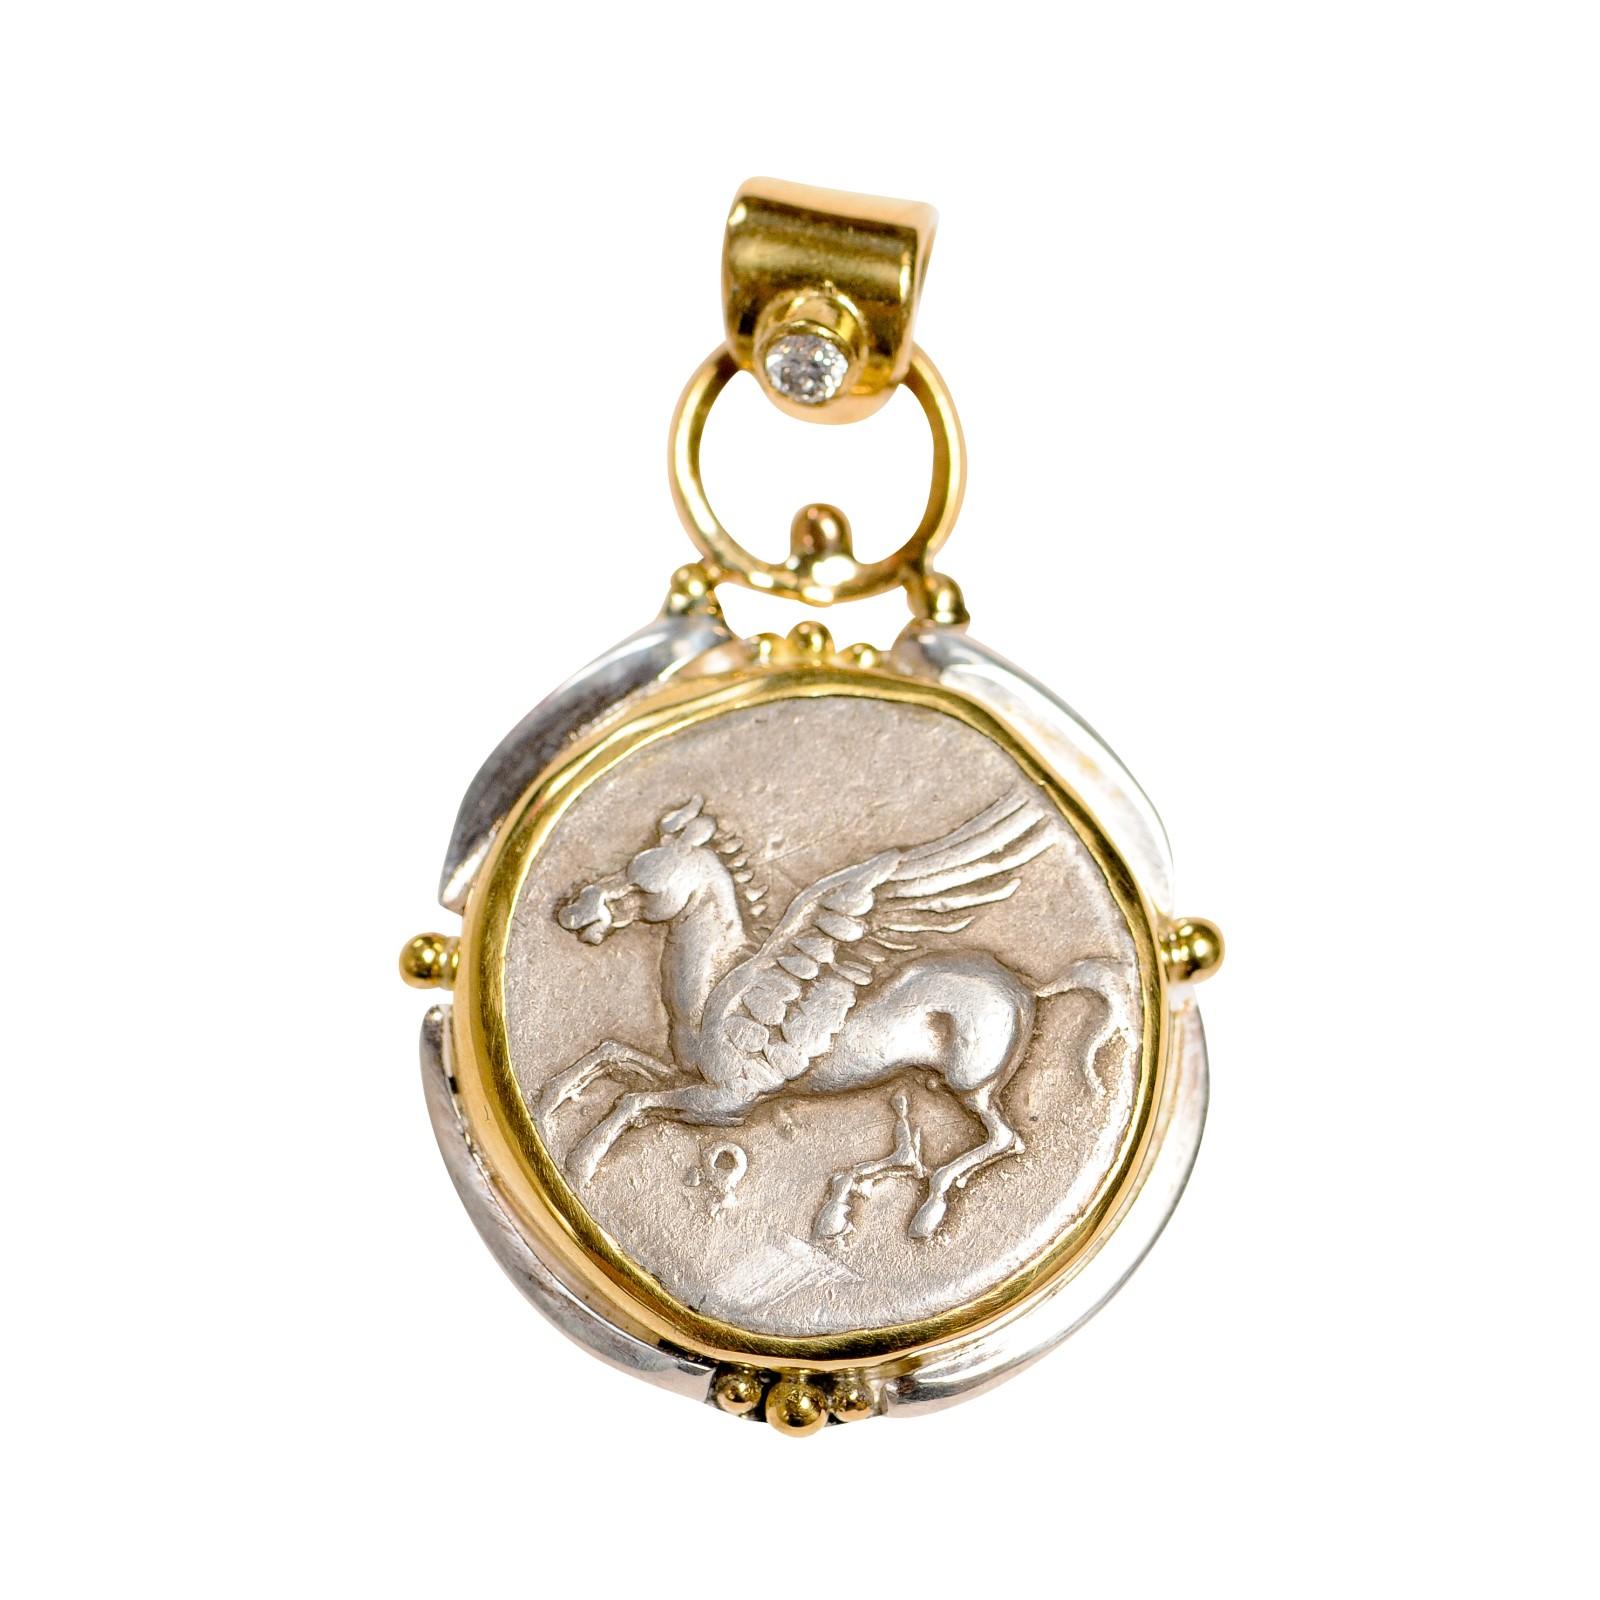 An authentic CORINTH Silver Stater Coin (circa 386-307 BC), set in a custom 22k gold and sterling silver bezel with a 22k gold bail (which has a diamond accent). The obverse, or front, side of this coin features Pegasus in flight, Koppa below. On